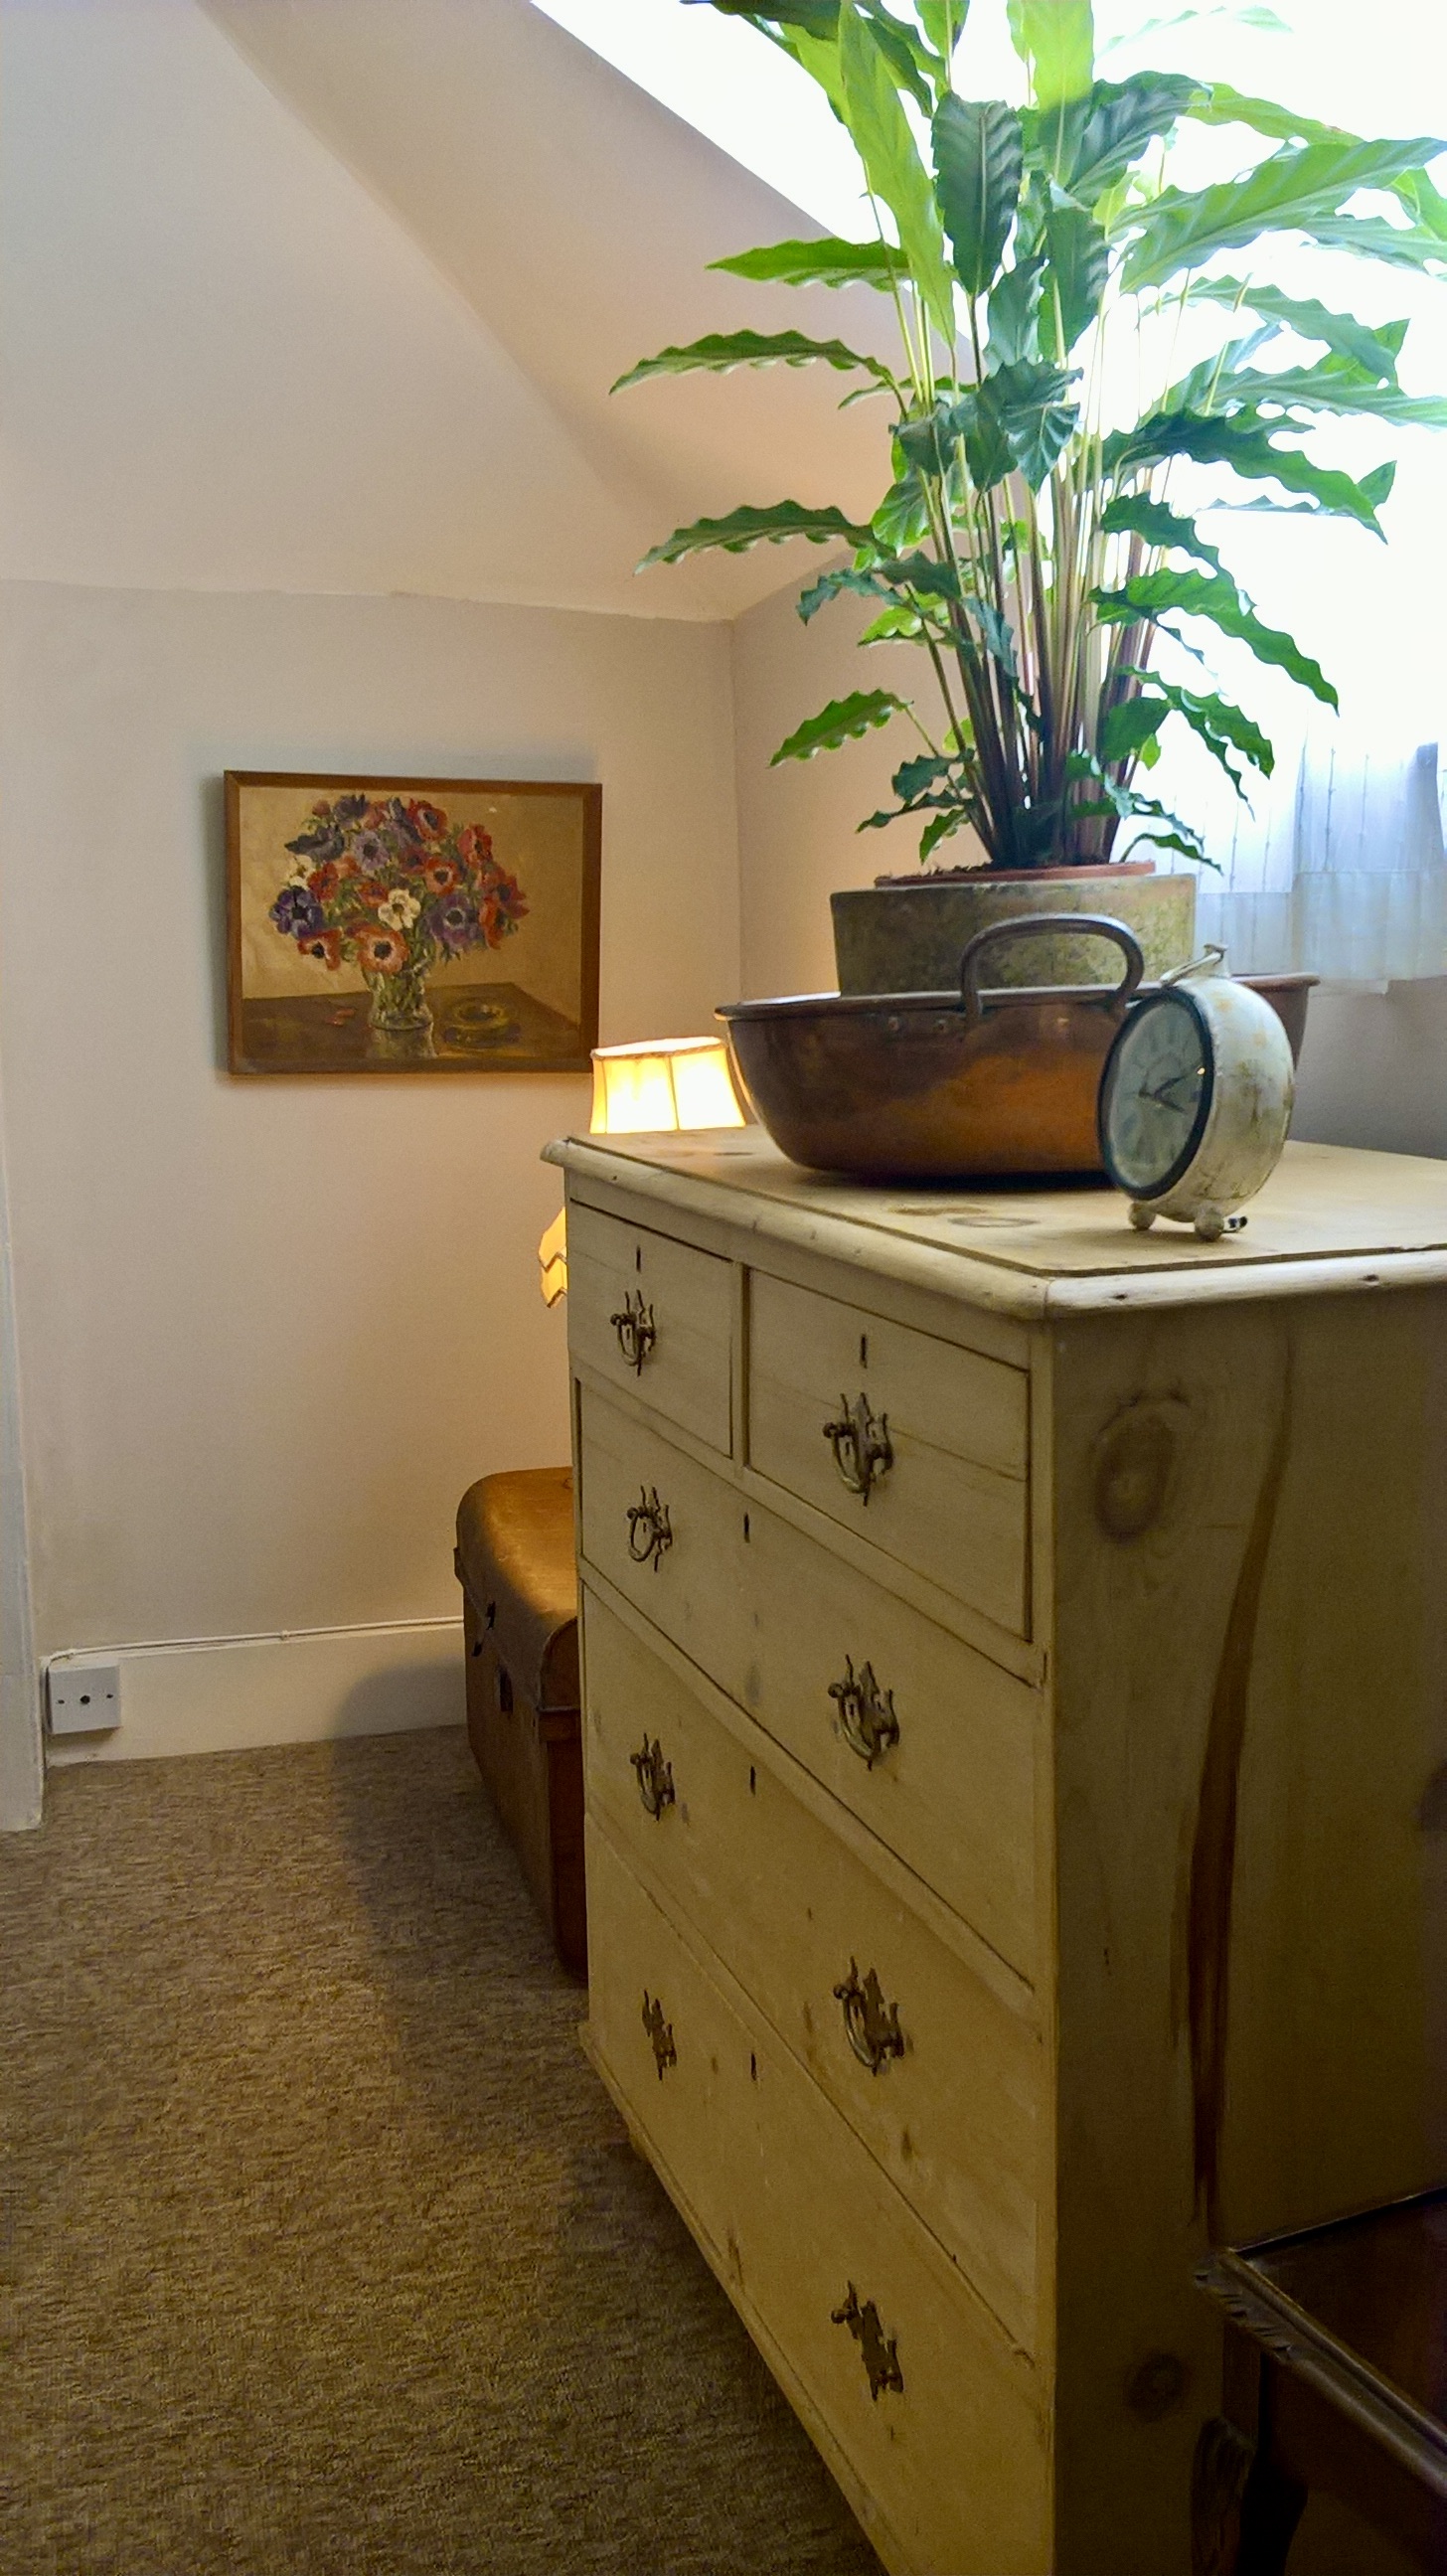 Chest of drawers and a plant within one of the therapy rooms